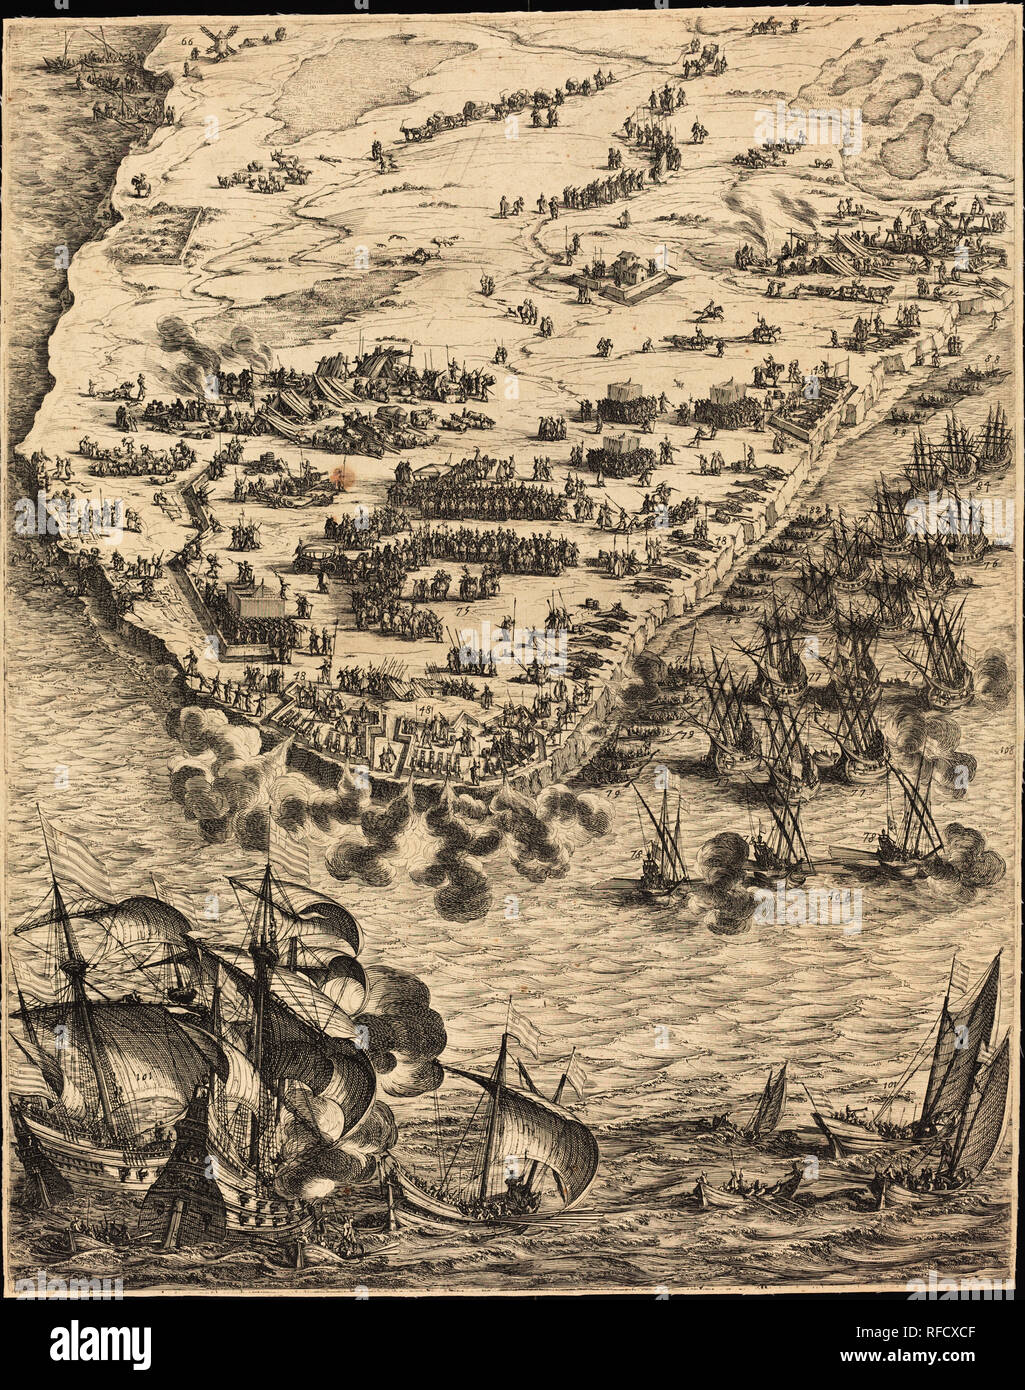 The Siege of La Rochelle [plate 10 of 16; set comprises 1952.8.97-112]. Dated: 1628/1631. Medium: etching and engraving. Museum: National Gallery of Art, Washington DC. Author: JACQUES CALLOT. Stock Photo